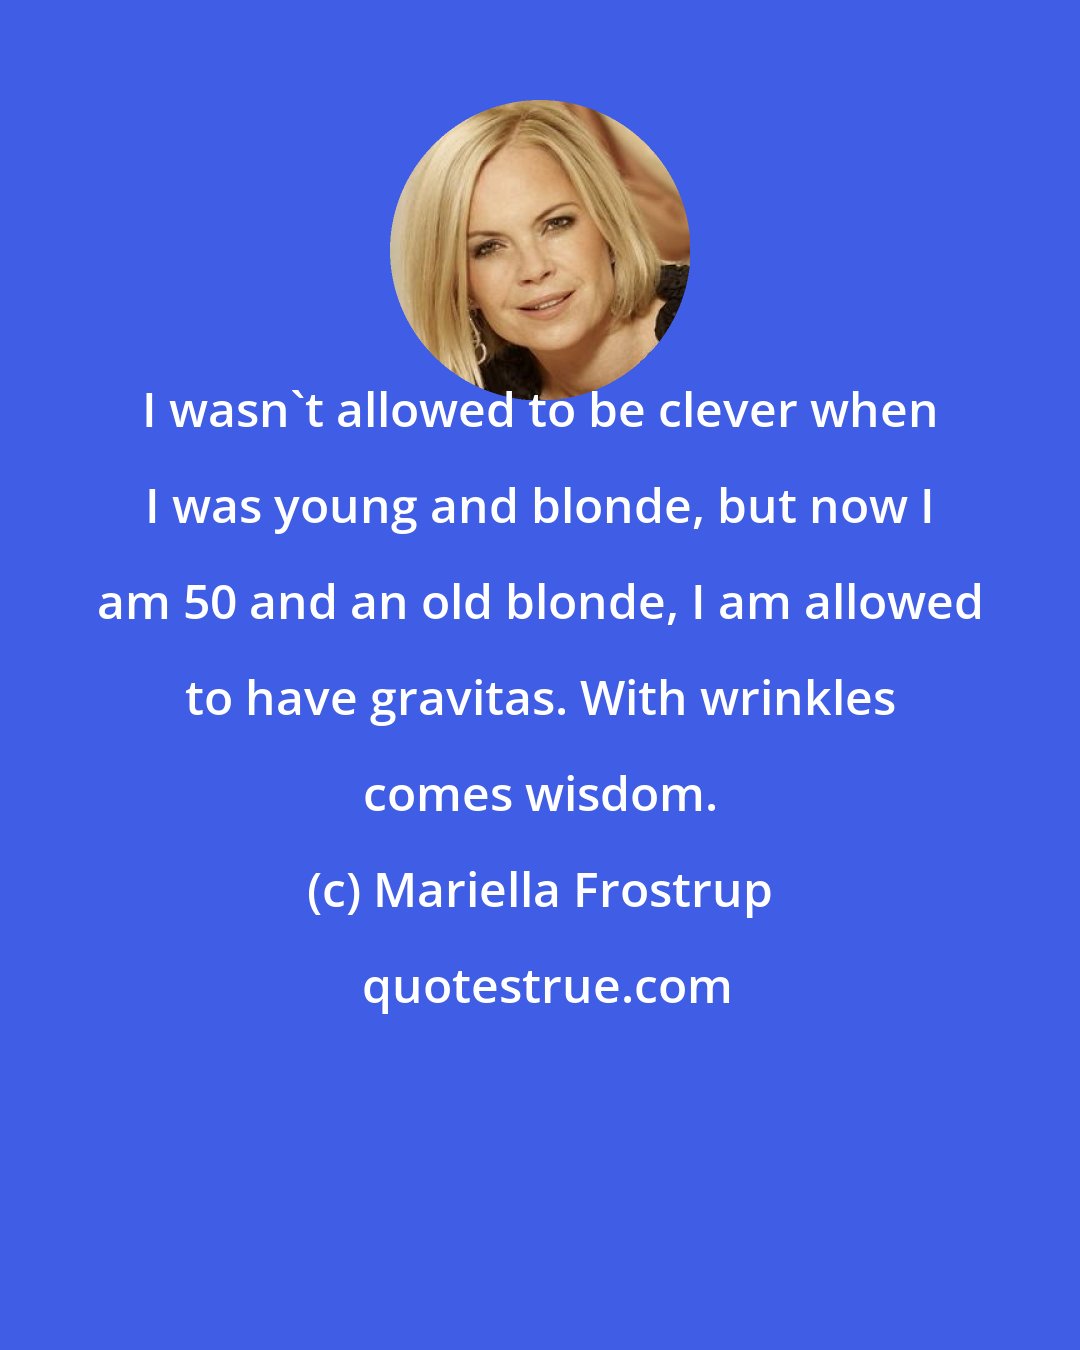 Mariella Frostrup: I wasn't allowed to be clever when I was young and blonde, but now I am 50 and an old blonde, I am allowed to have gravitas. With wrinkles comes wisdom.